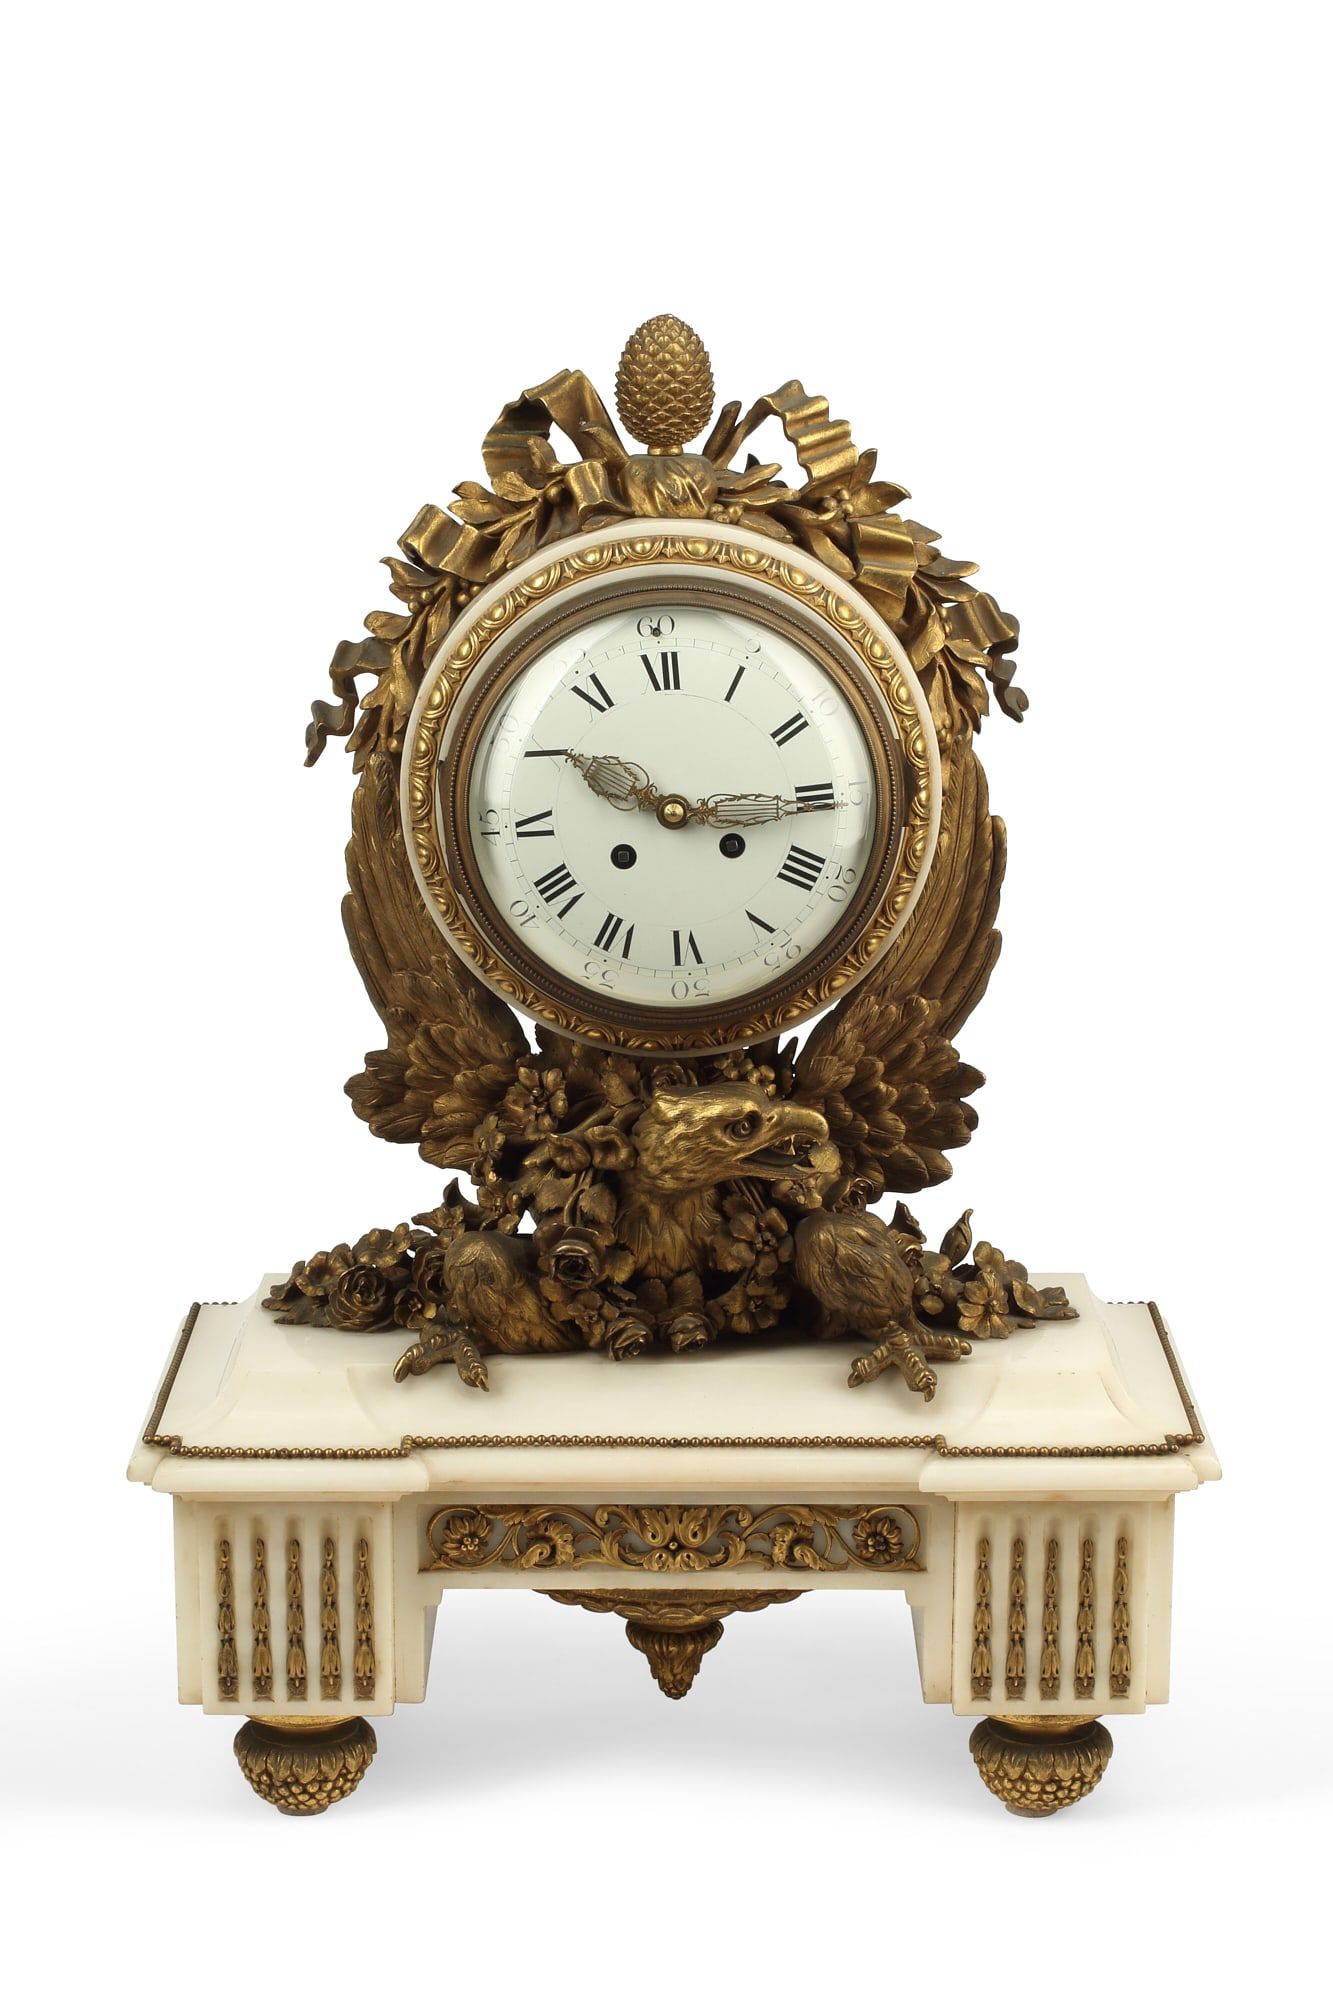 A LOUIS XVI STYLE BRONZE AND MARBLE